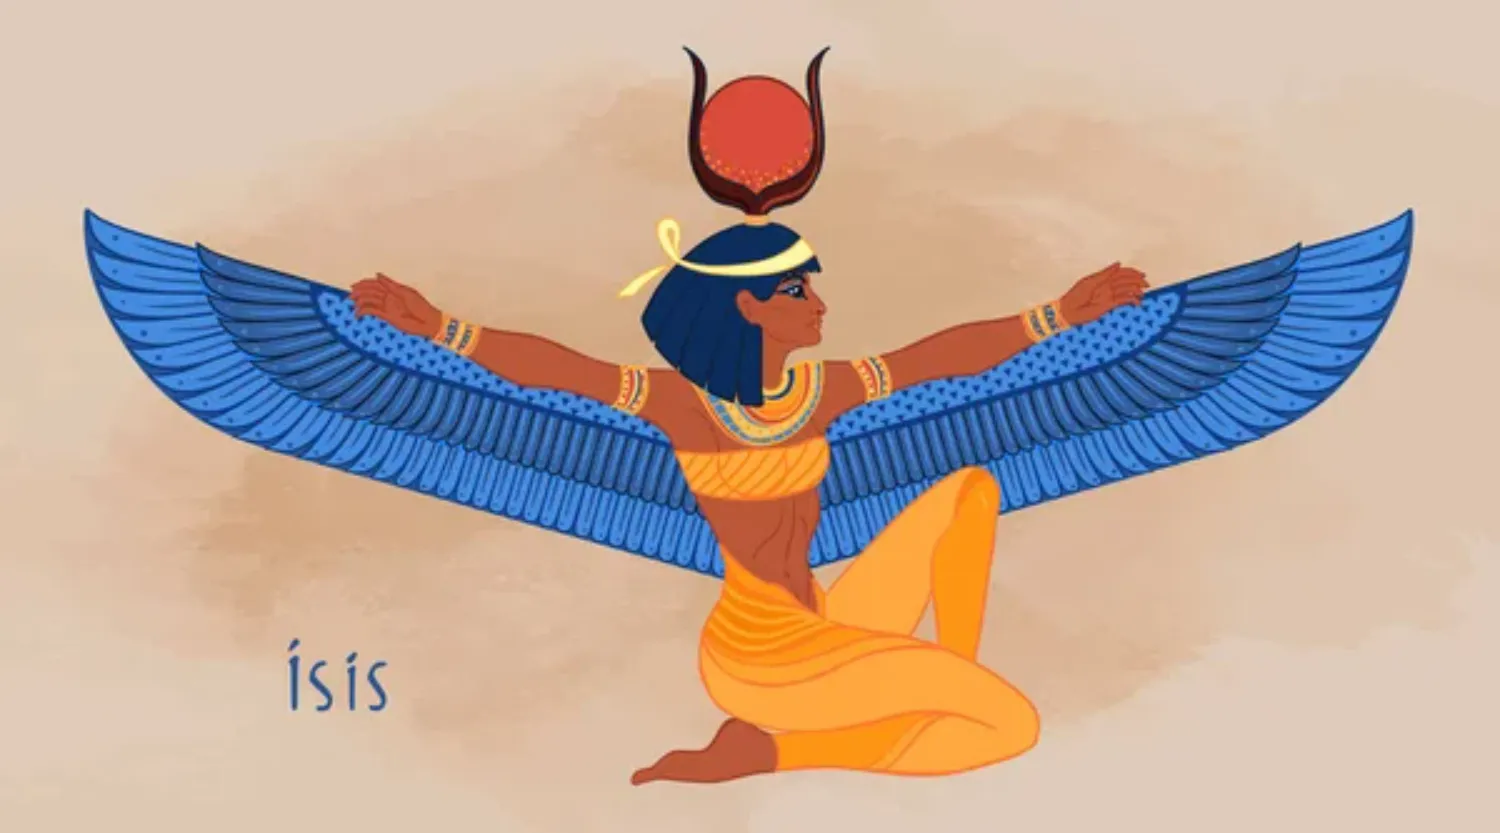 A 2D image of Isis with blue wings and the disc with horns.